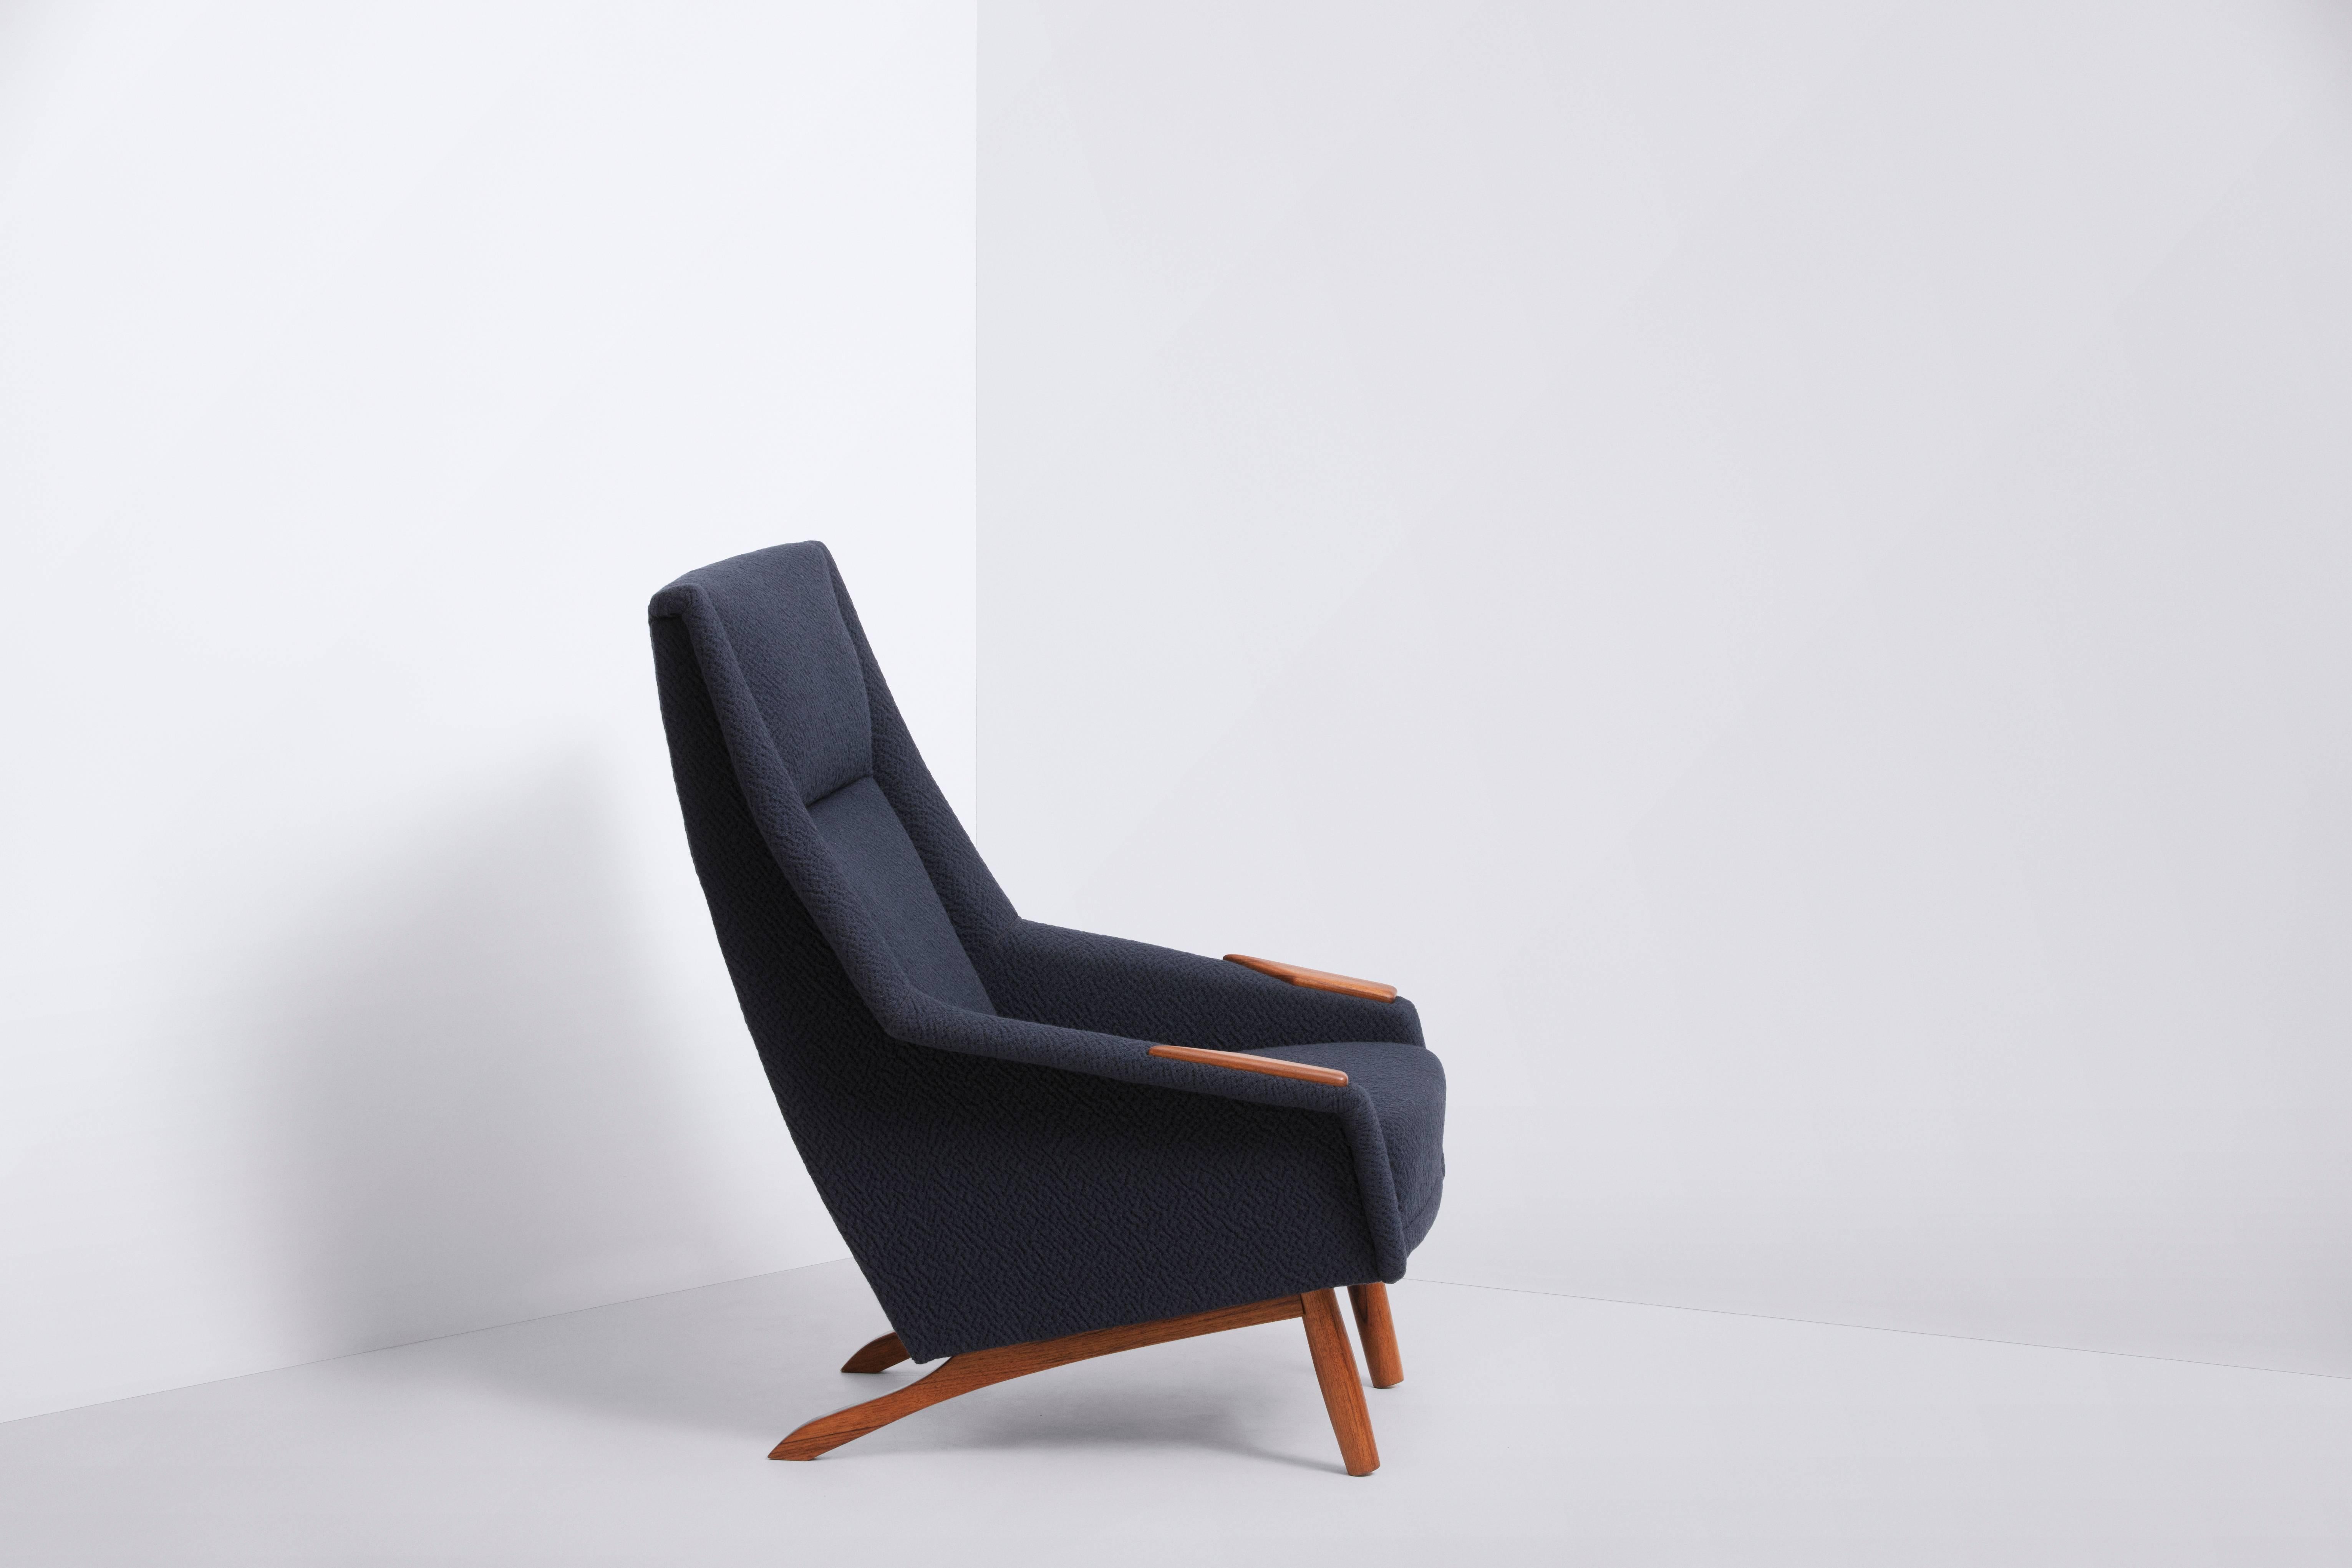 This Danish produced lounge chair has a very comfortable, deep seating experience. The new Wool Upholstery by Kvadrat in dark navy is as stylish and fashionable now as it was in the 1960s. The exposed paws and legs are of solid teak wood and in good